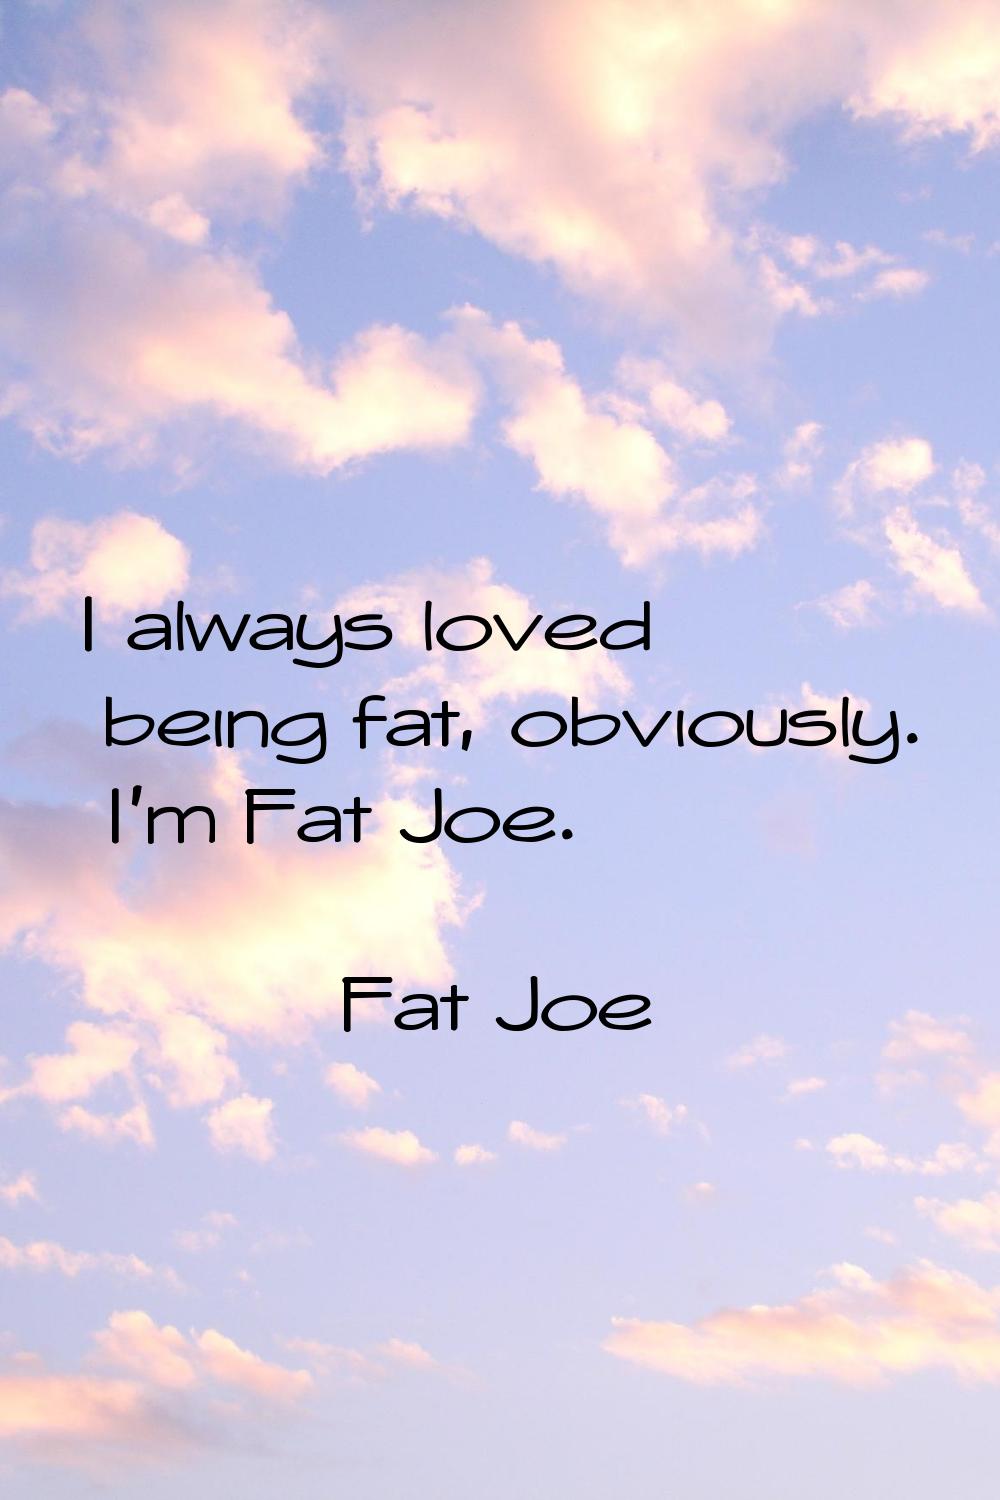 I always loved being fat, obviously. I'm Fat Joe.